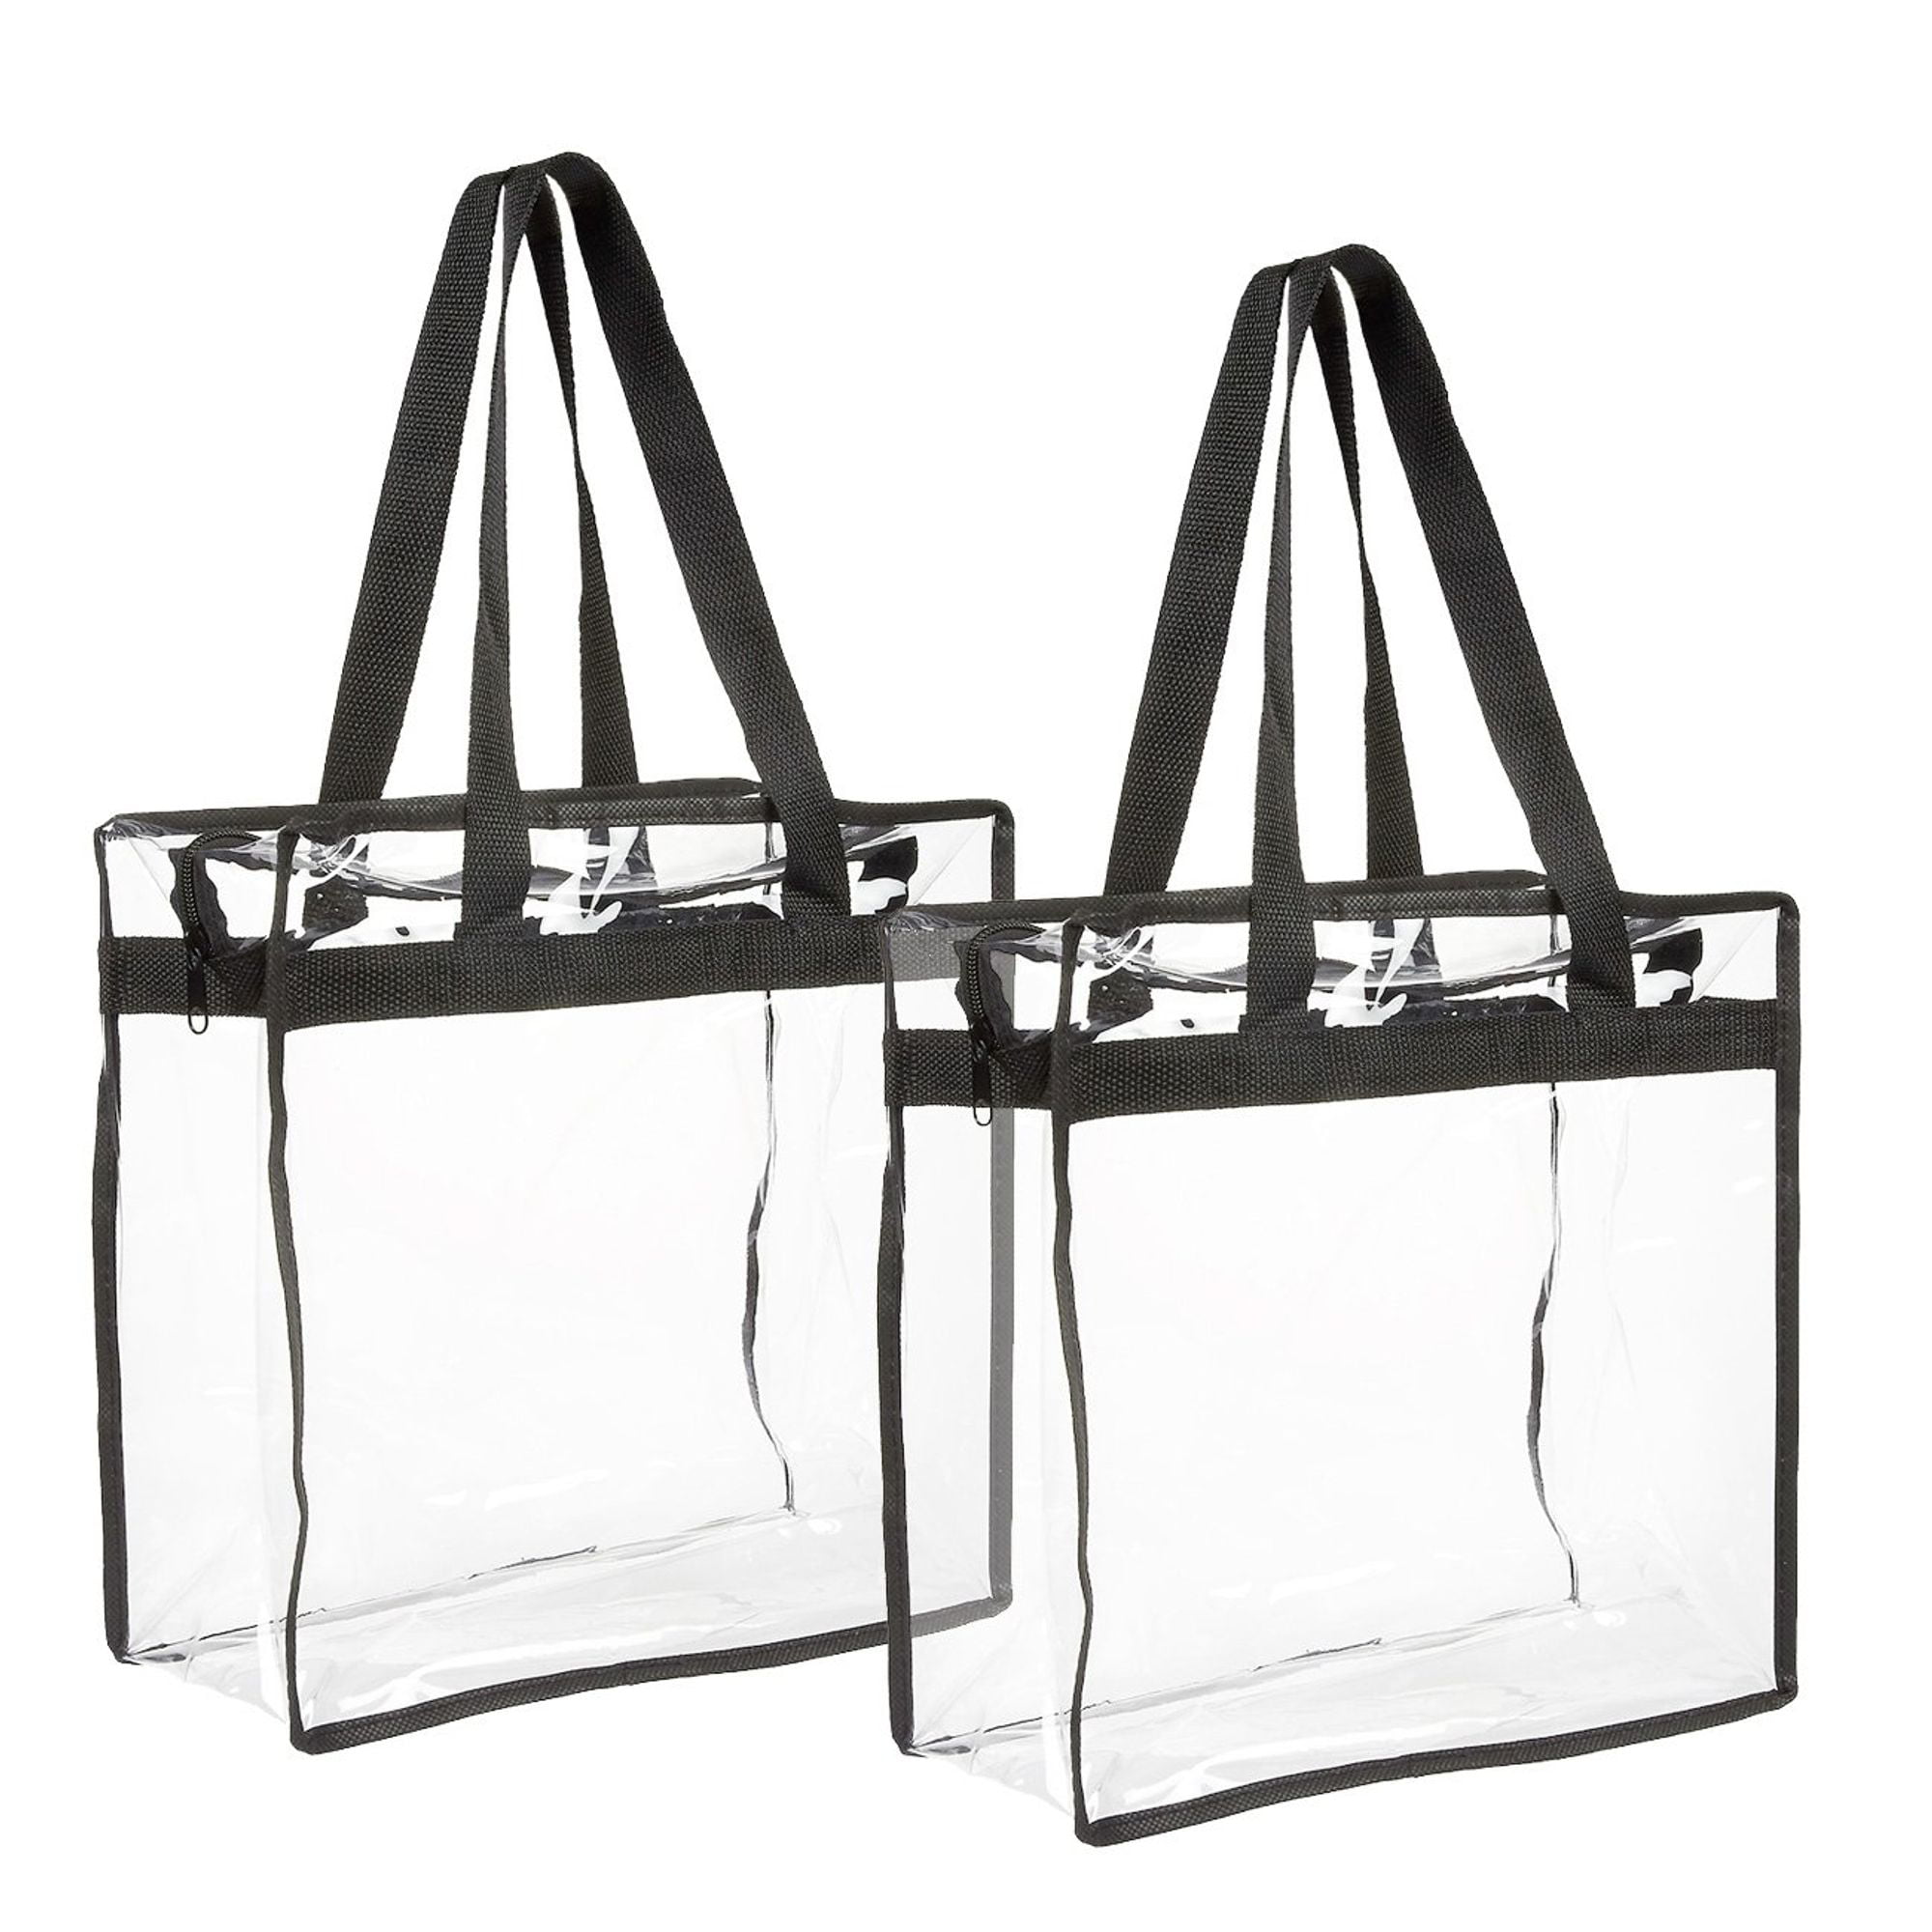 15 Cute Clear Bags for Stadiums, Concerts, Festivals, & More